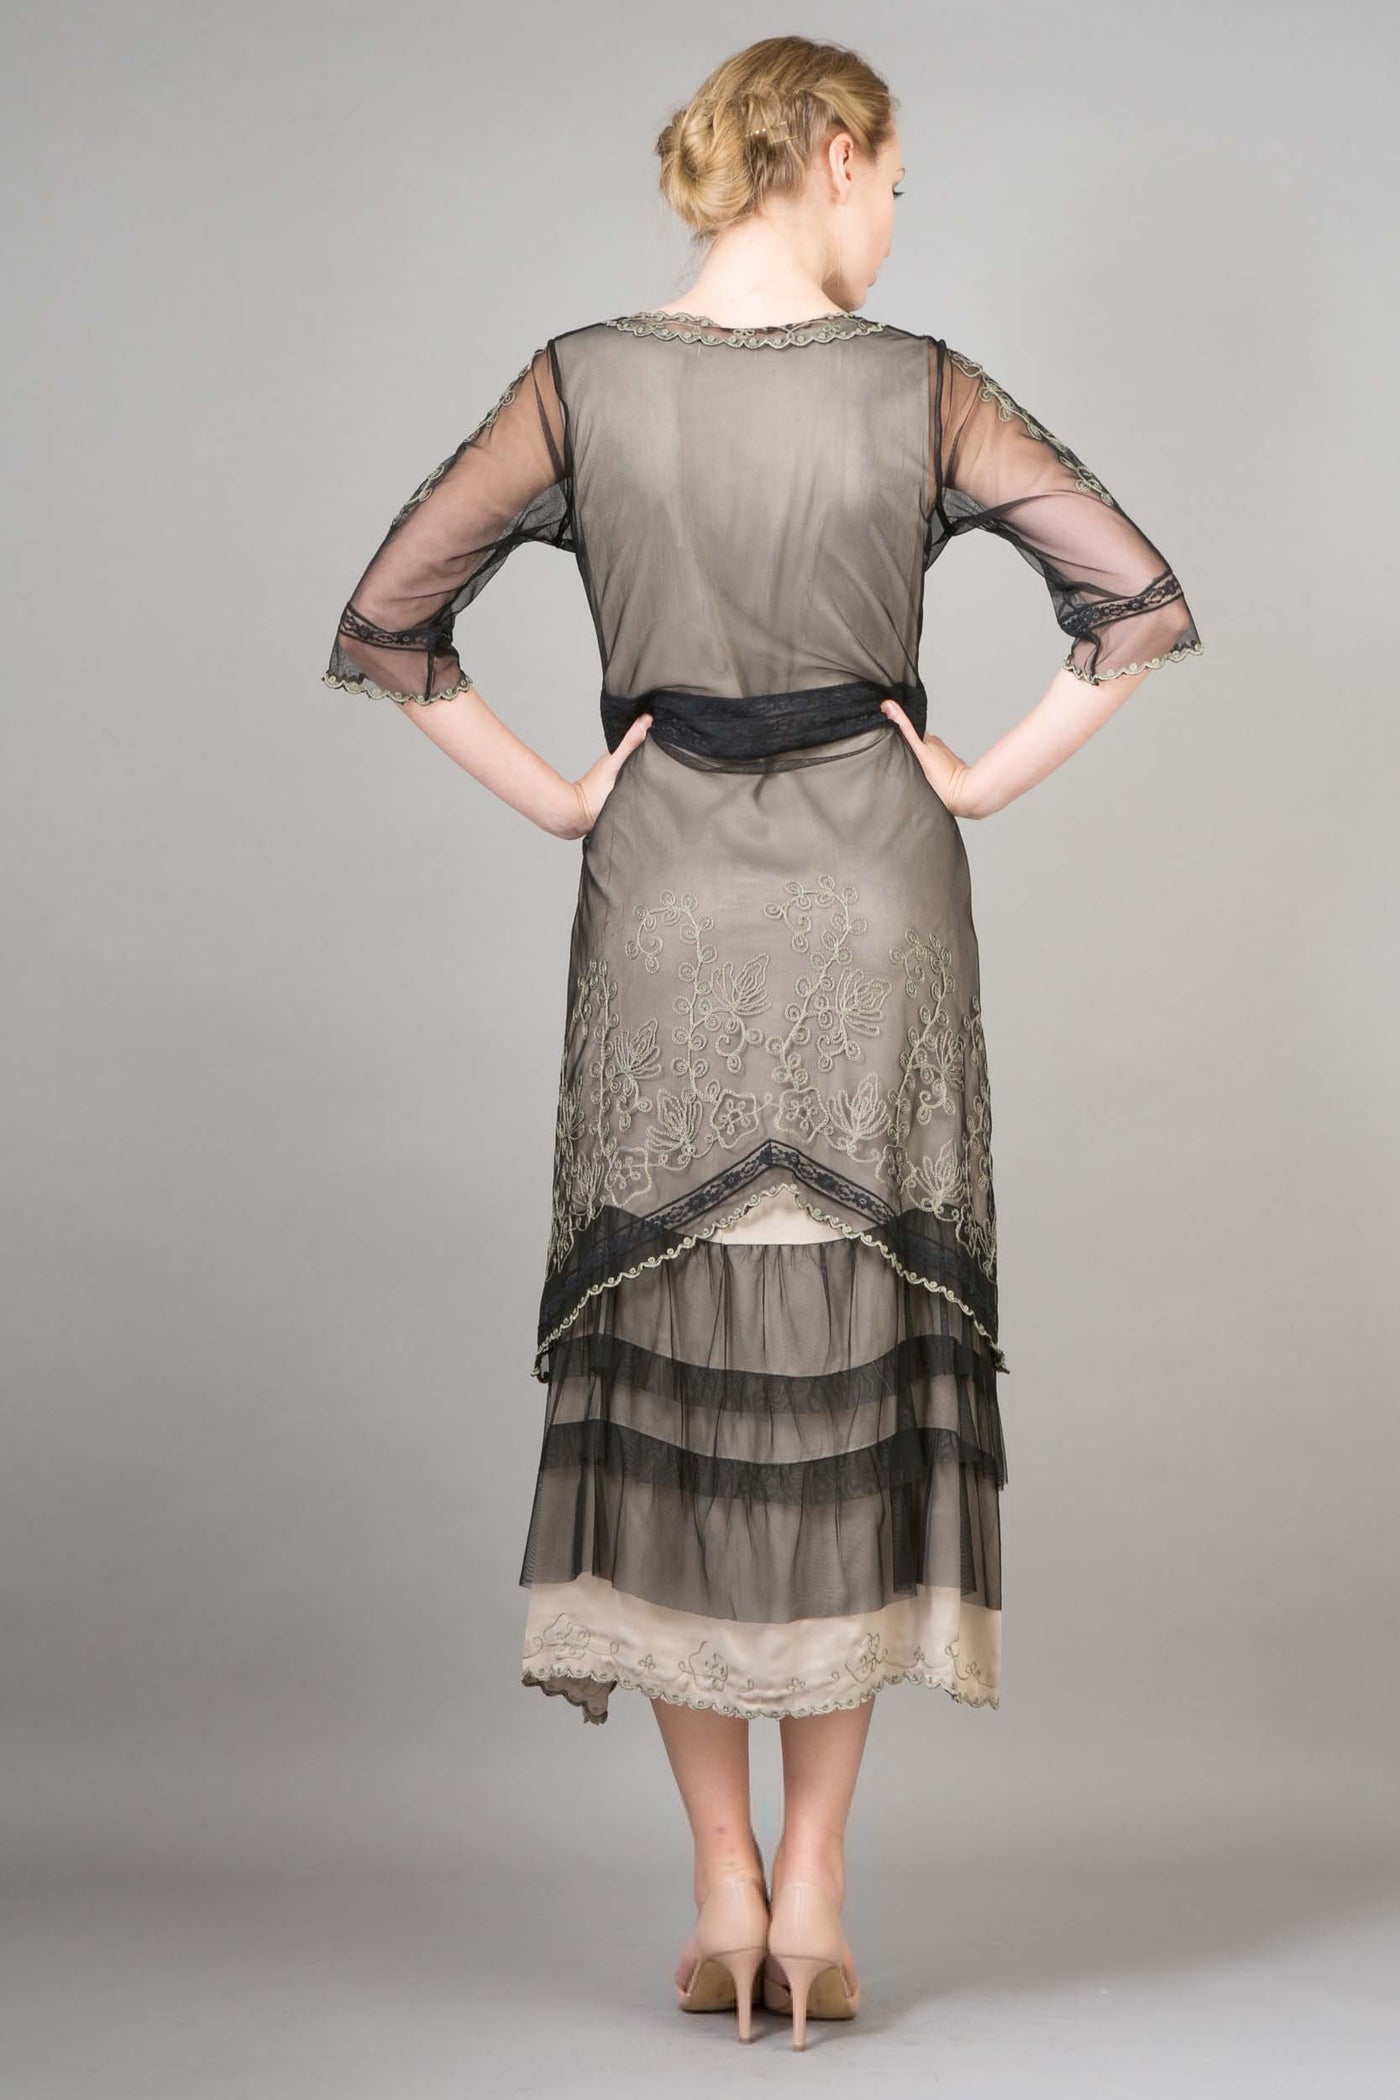 Titanic Tea Party Dress in Black-Silver by Nataya - SOLD OUT